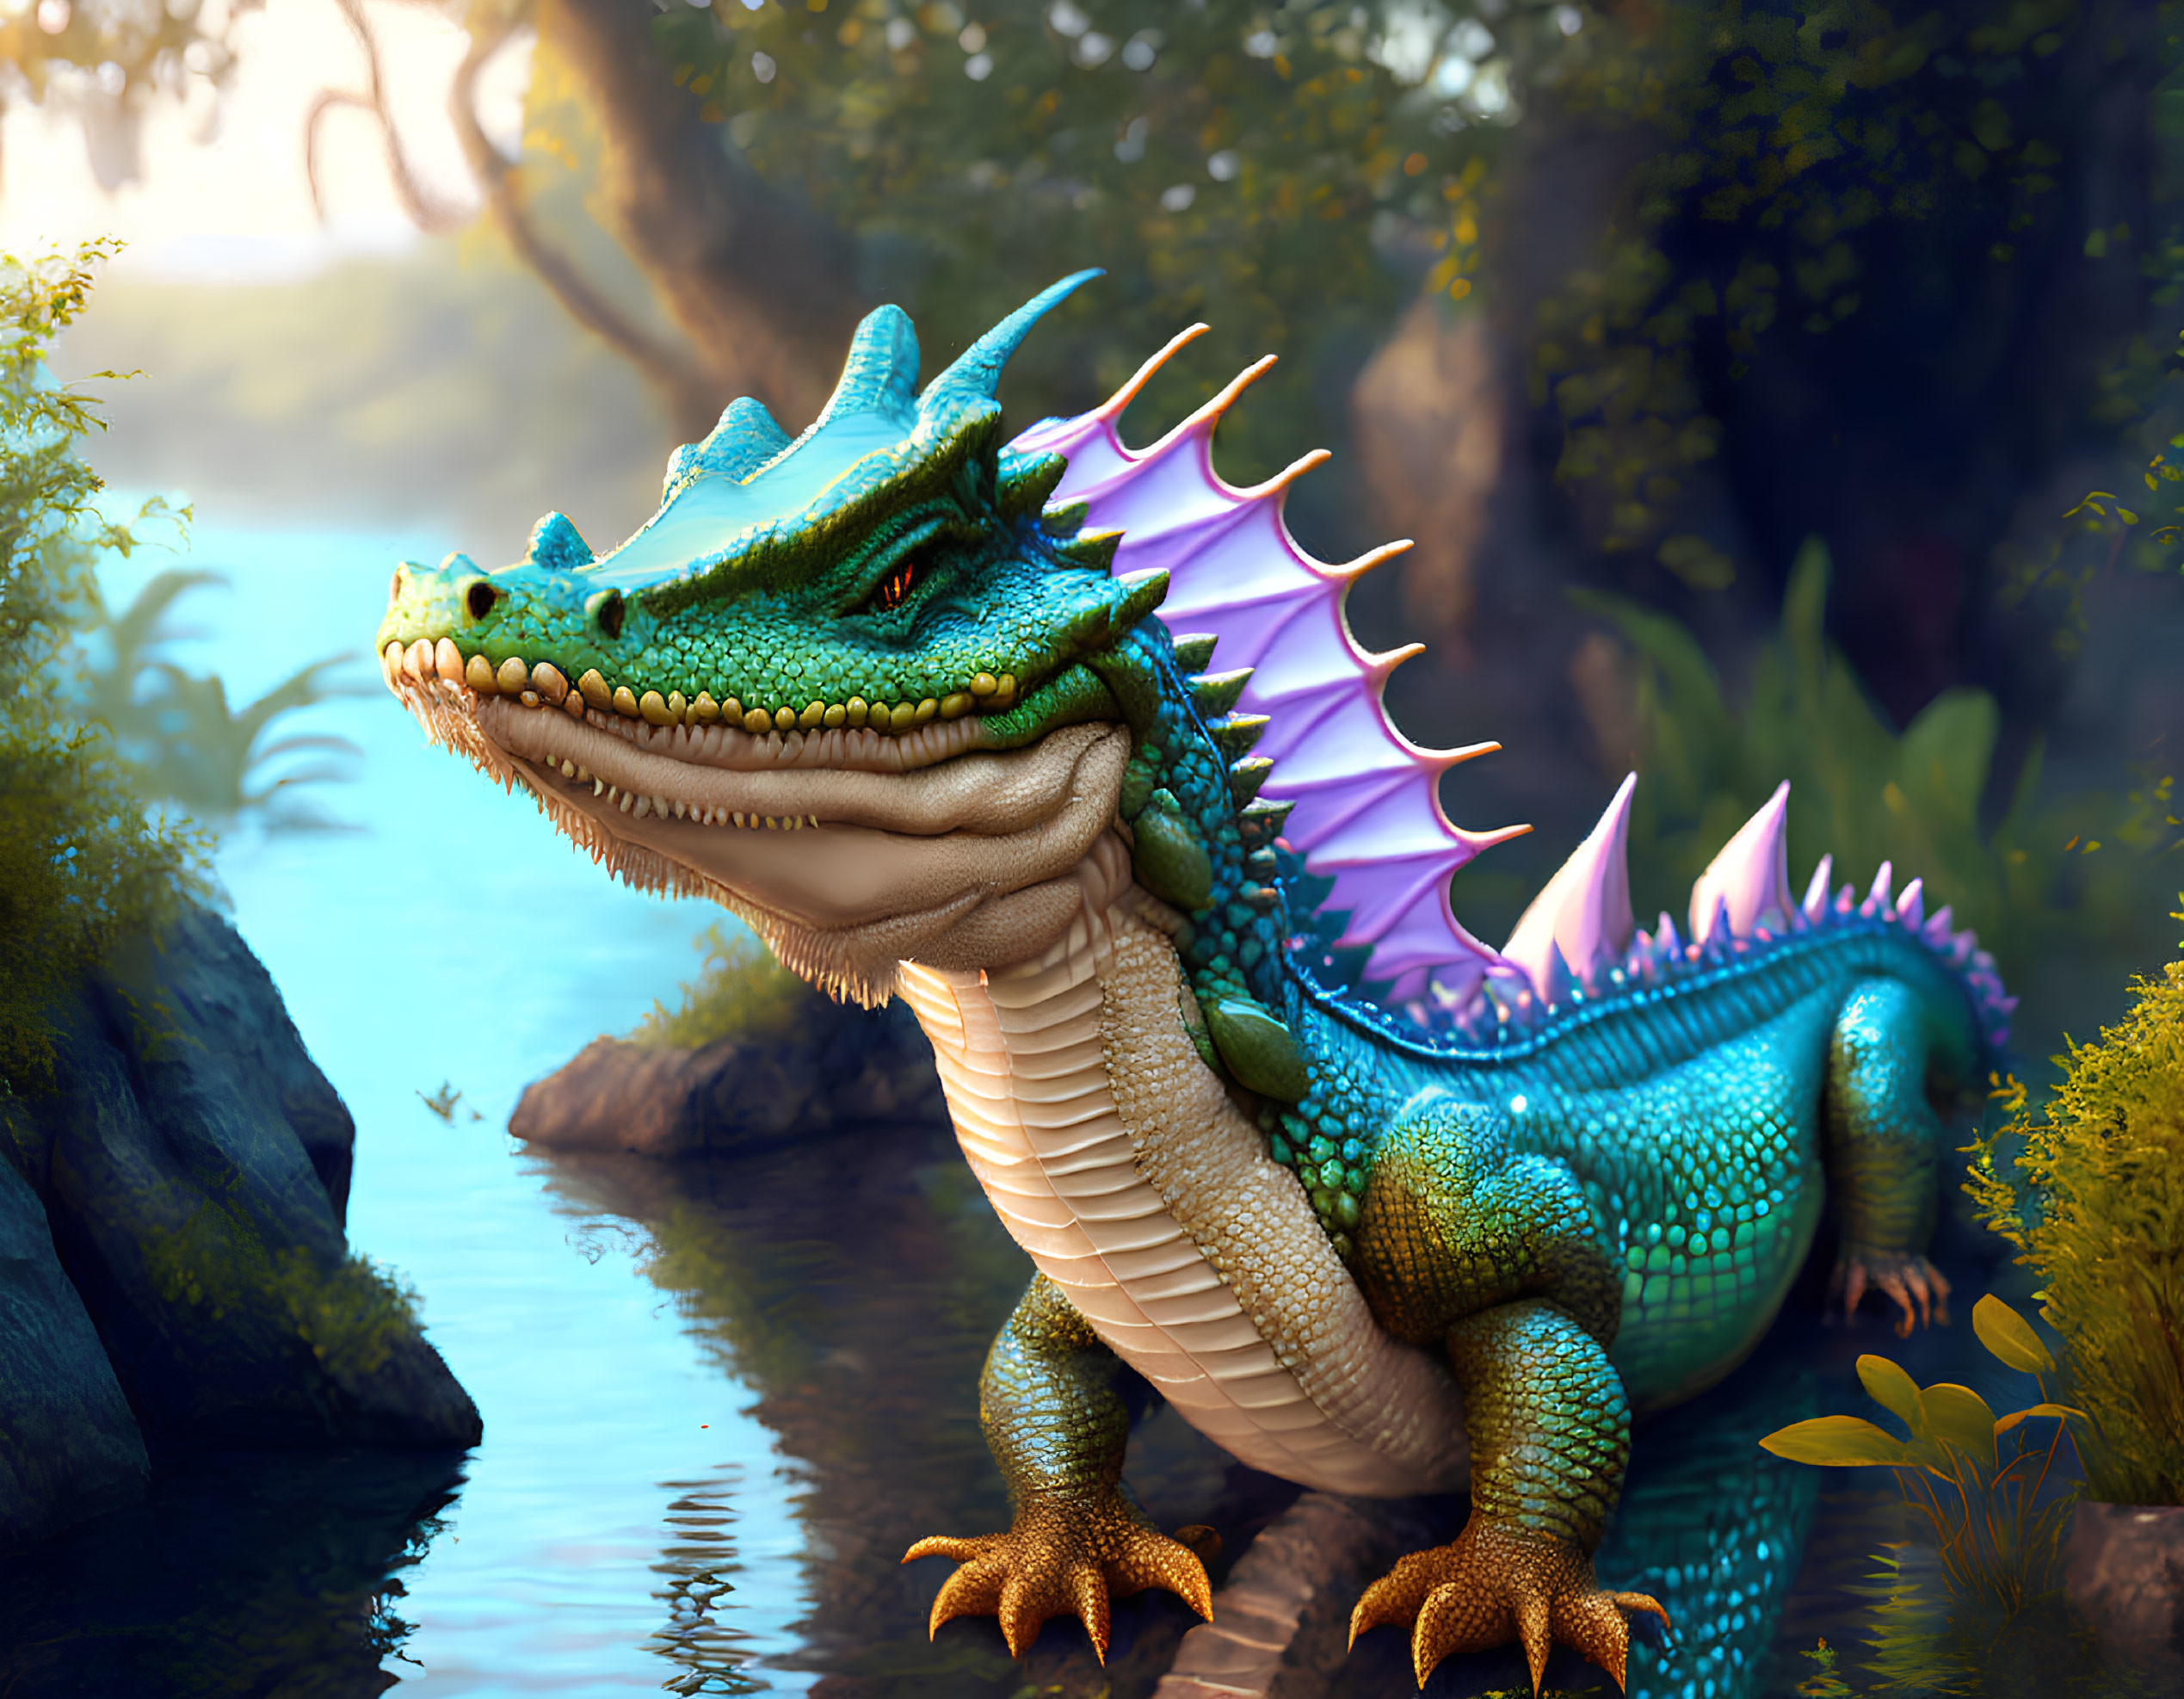 Detailed Dragon Illustration in Vibrant Colors